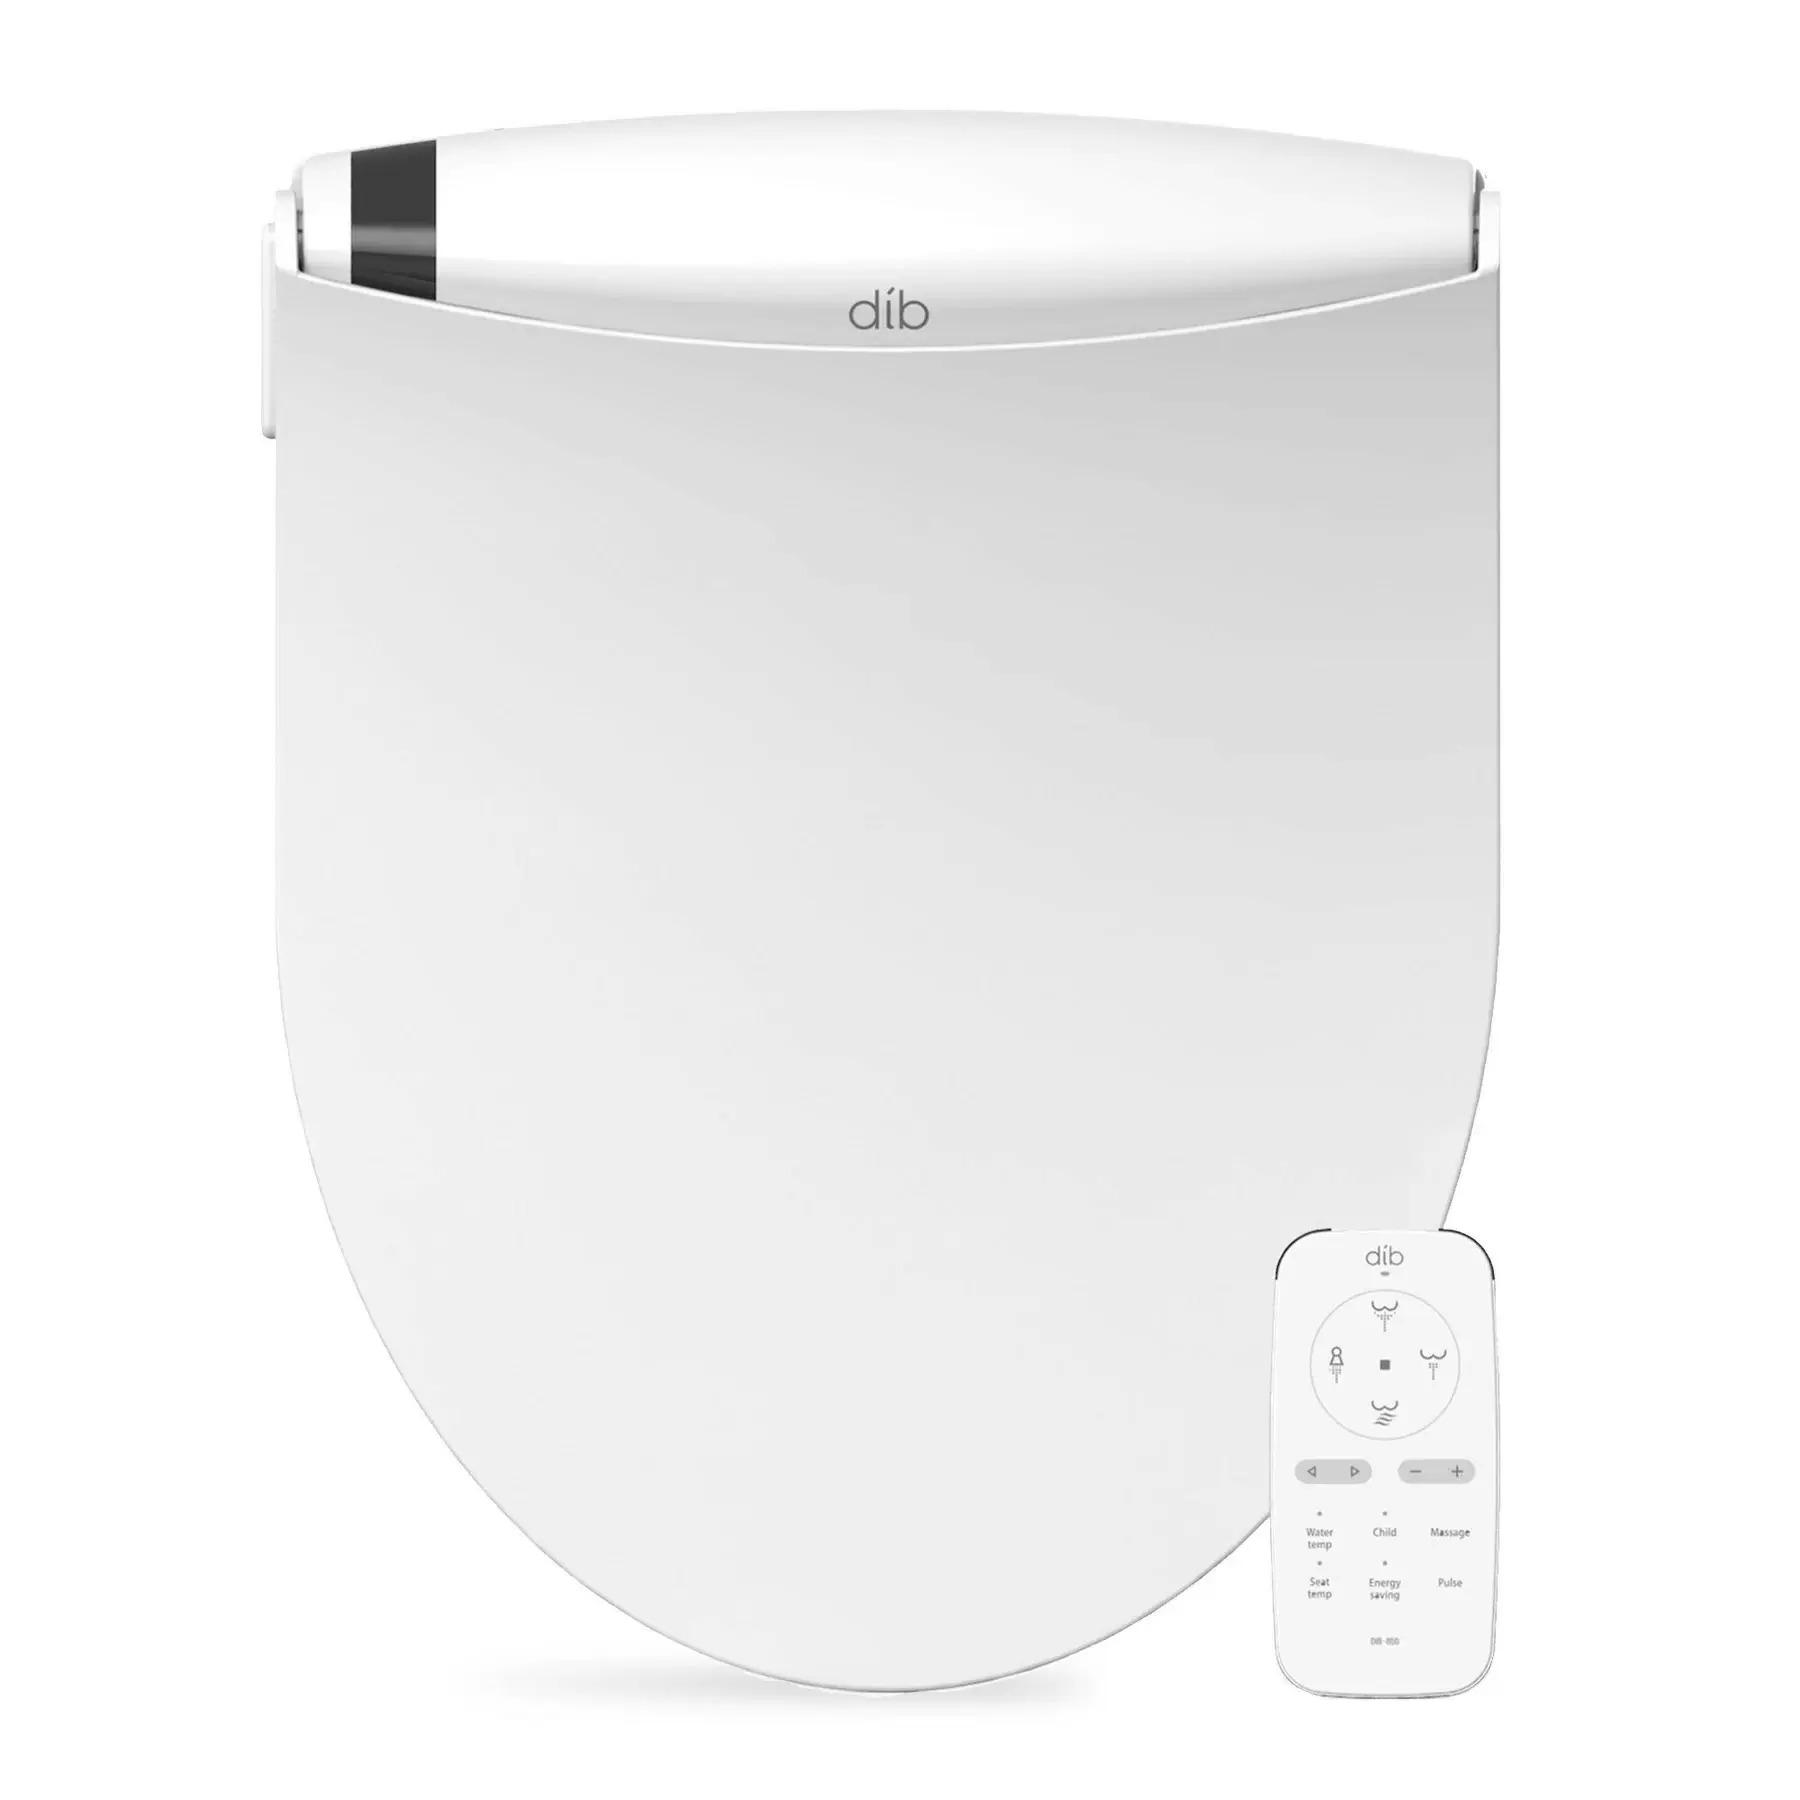 BioBidet DIB Special Edition Luxury Bidet Seat for $247.49 Shipped